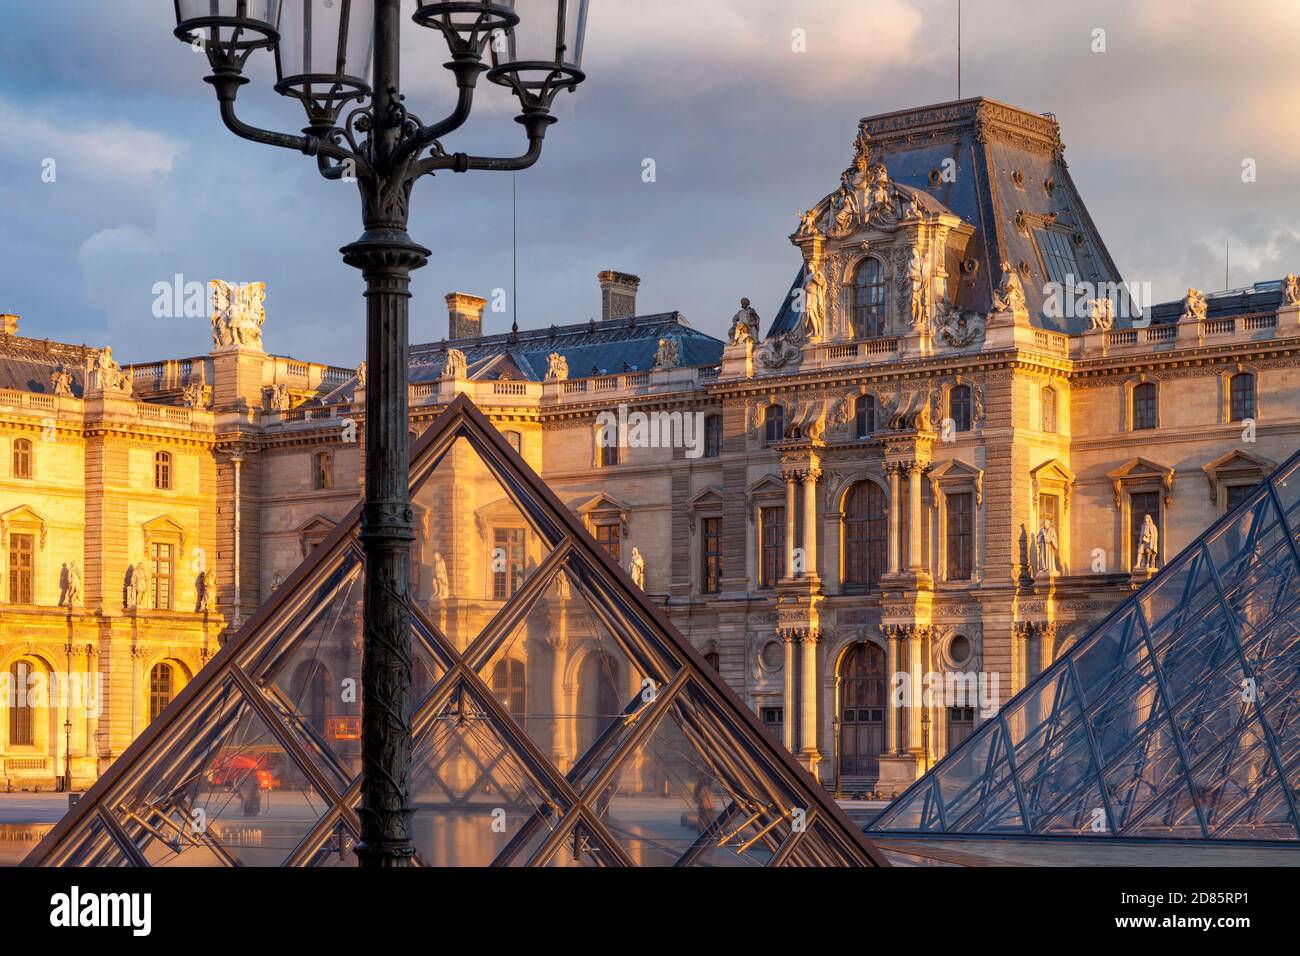 Glass pyramids and architecture of Musee du Louvre, Paris France Stock Photo